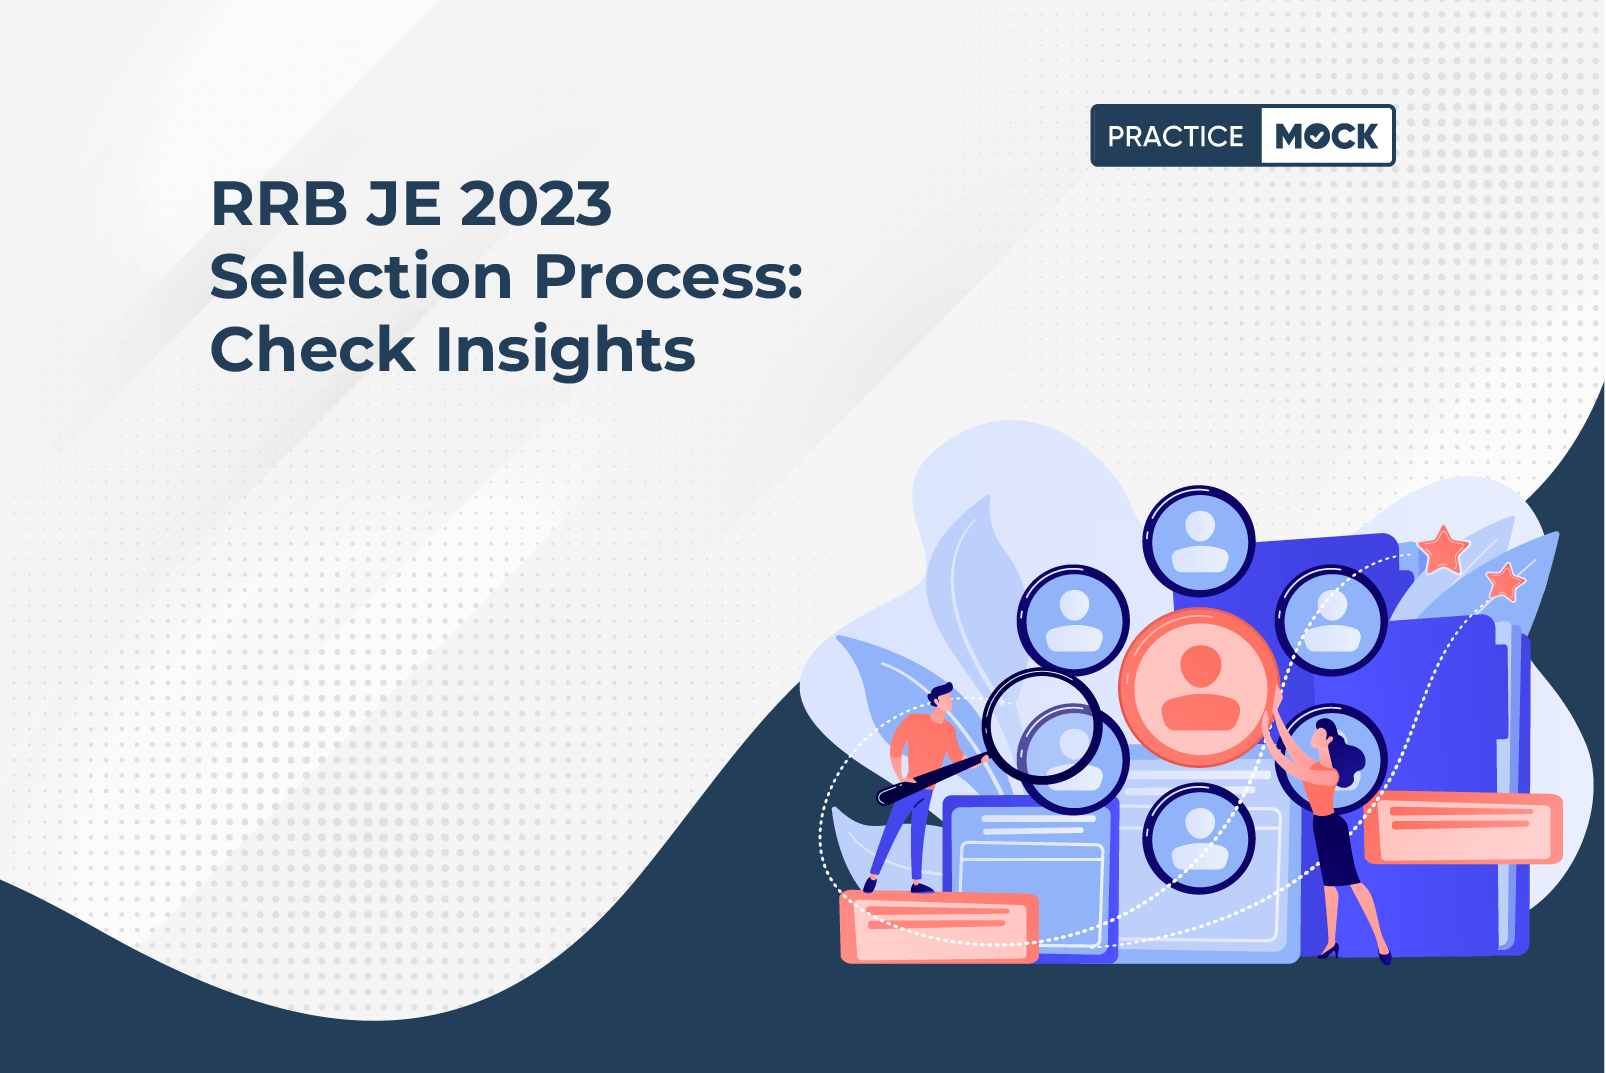 RRB JE 2023 Selection Process: Check Insights